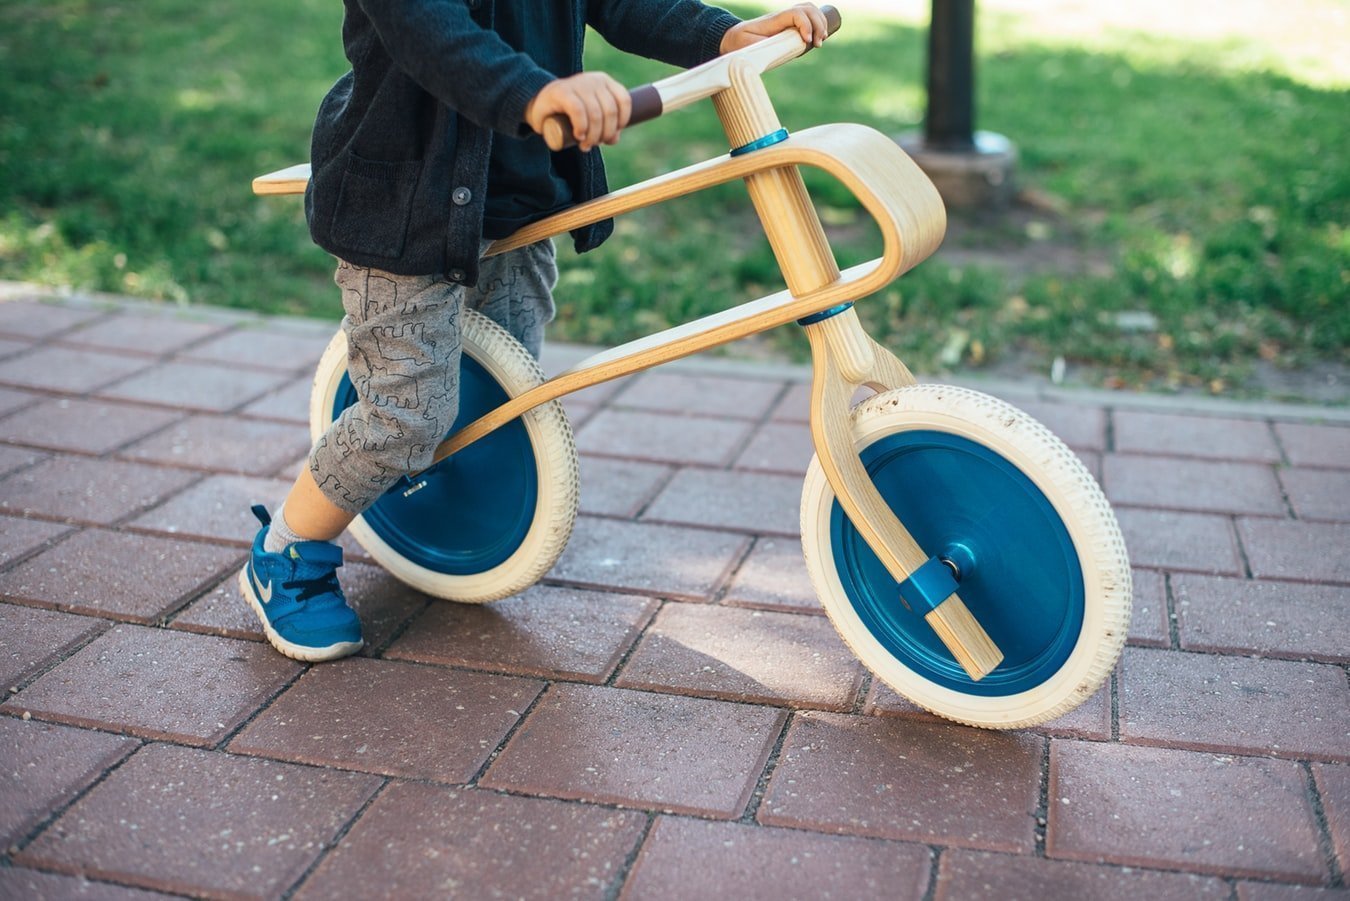 wooden trike for 1 year old